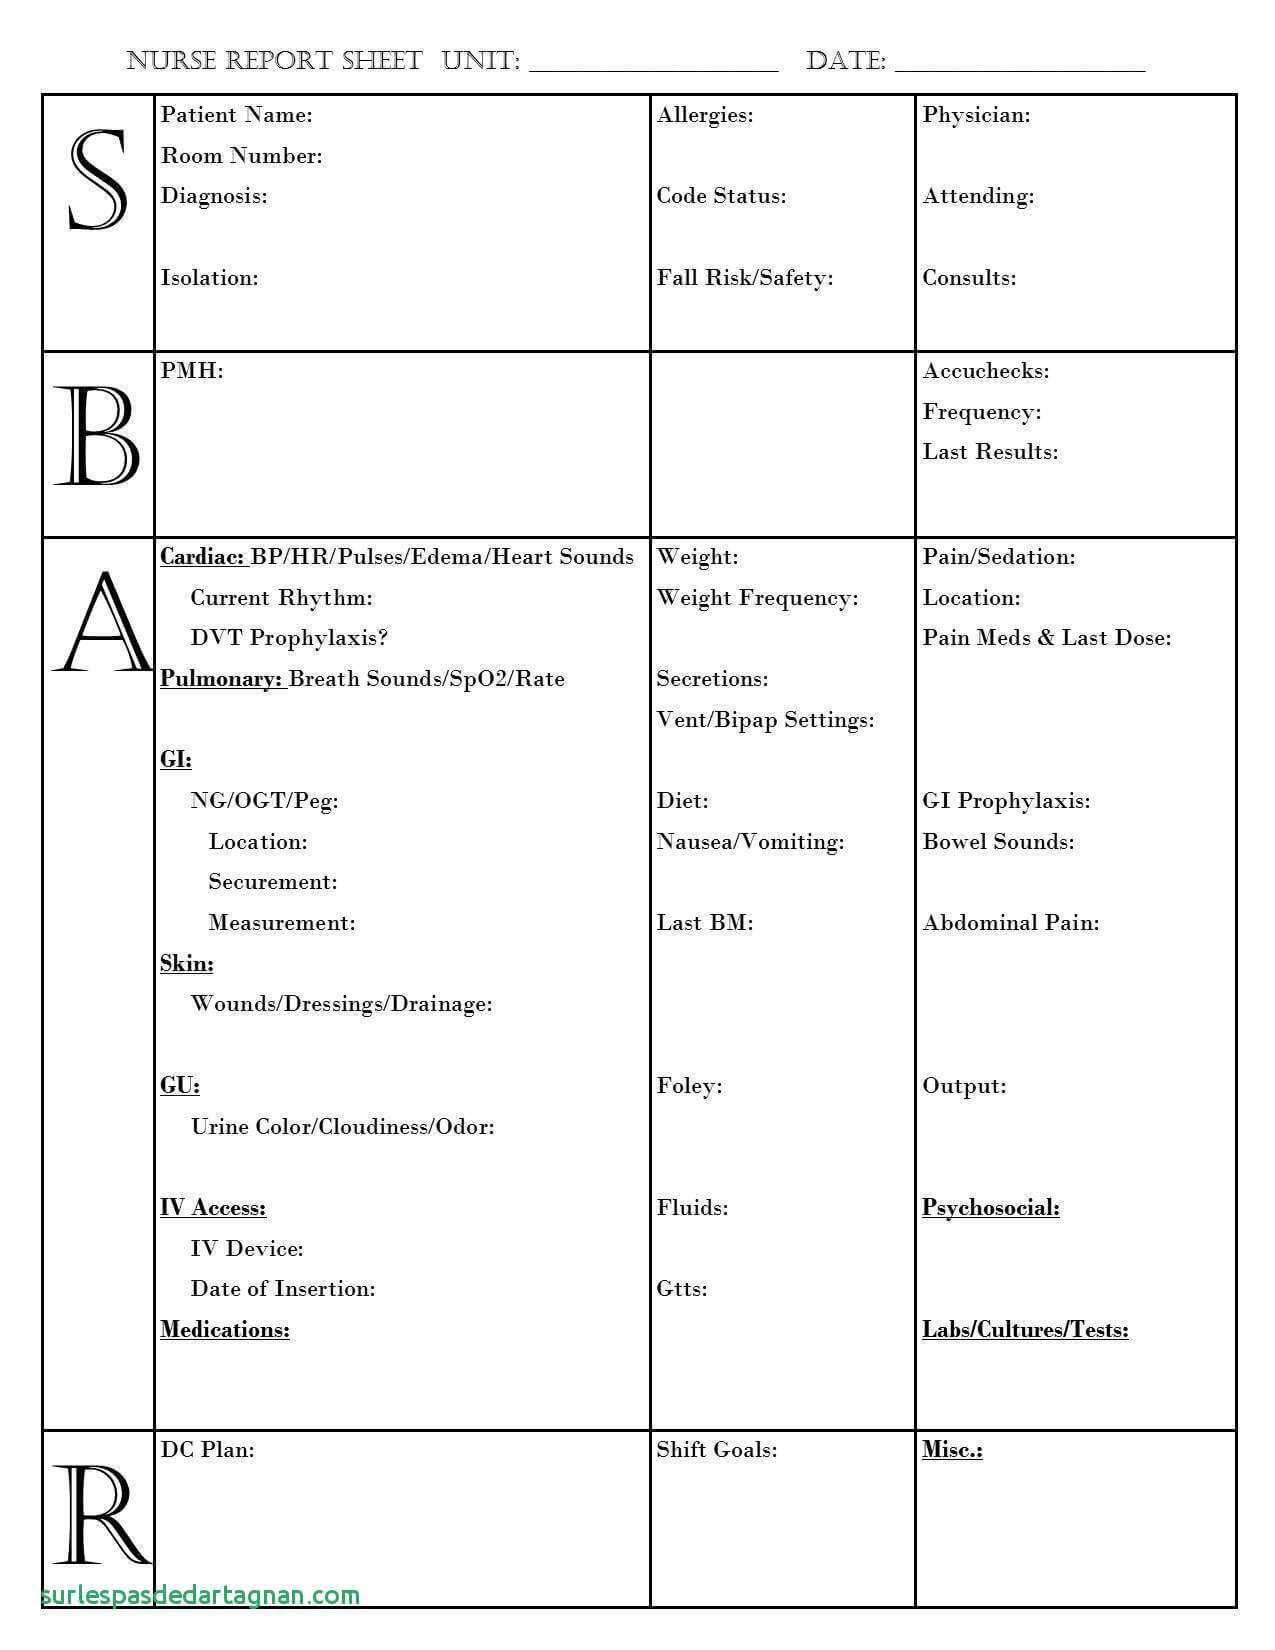 Nursing Report Sheet Template Together With Sbar Nurse Throughout Nursing Report Sheet Template